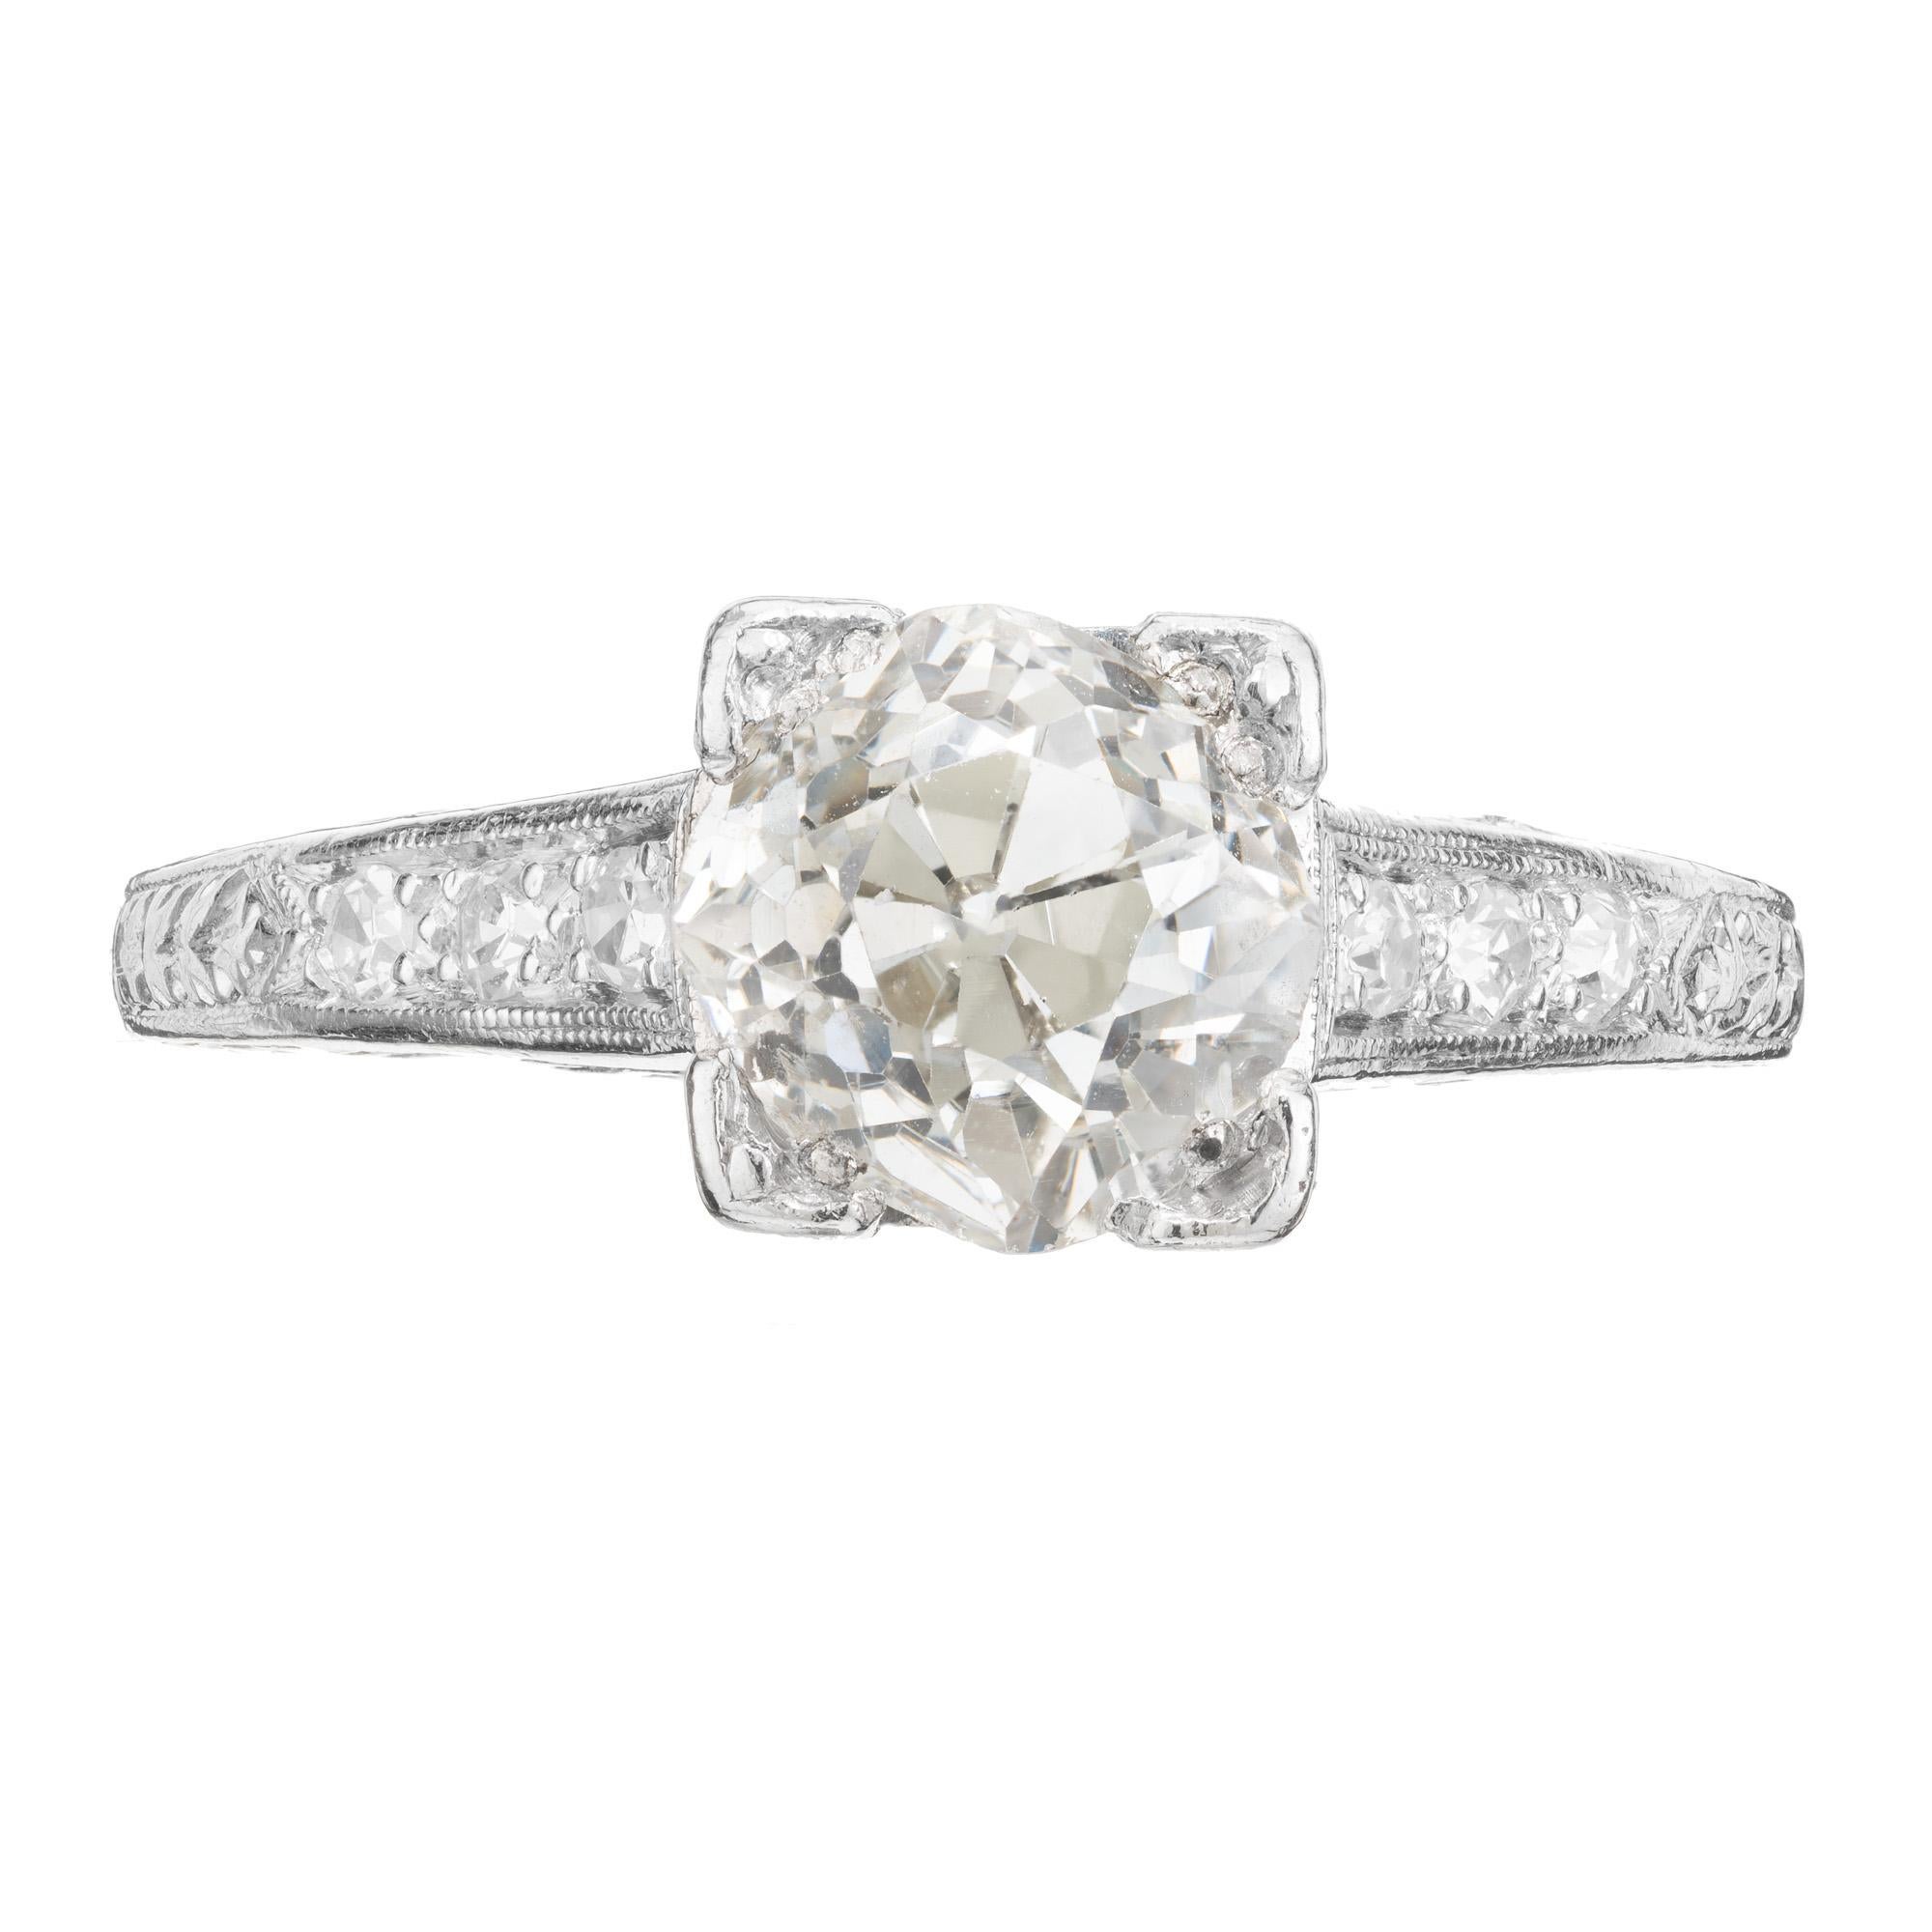 The center piece of this 1920's Art Deco engagement ring is a highly desirable 2.05ct old mine brilliant cut diamond. Graded by the EGL as I, near colorless. The setting is platinum and embraces the art deco style of the era and is adorned with